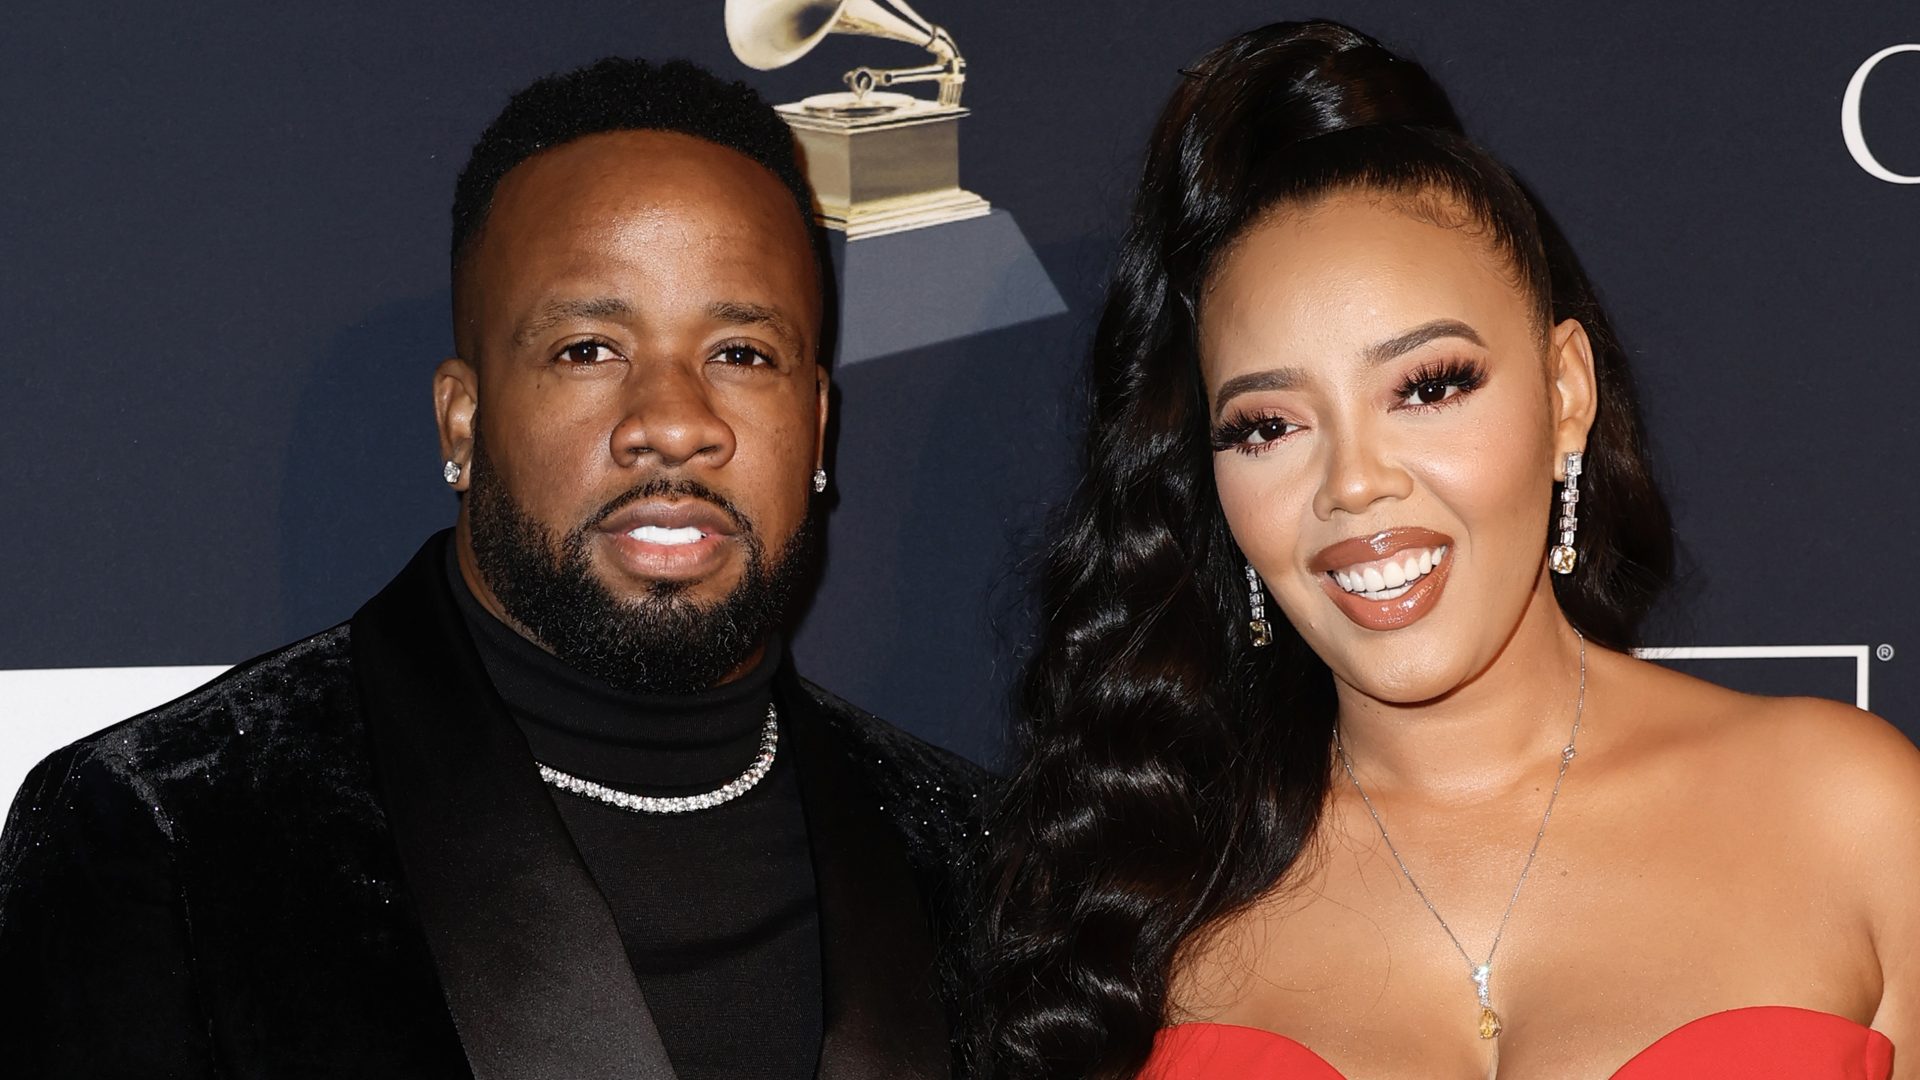 Social Media Praises Angela Simmons & Yo Gotti's Relationship After Viral Interview Moment: 'He Is Doing All The Right Things'